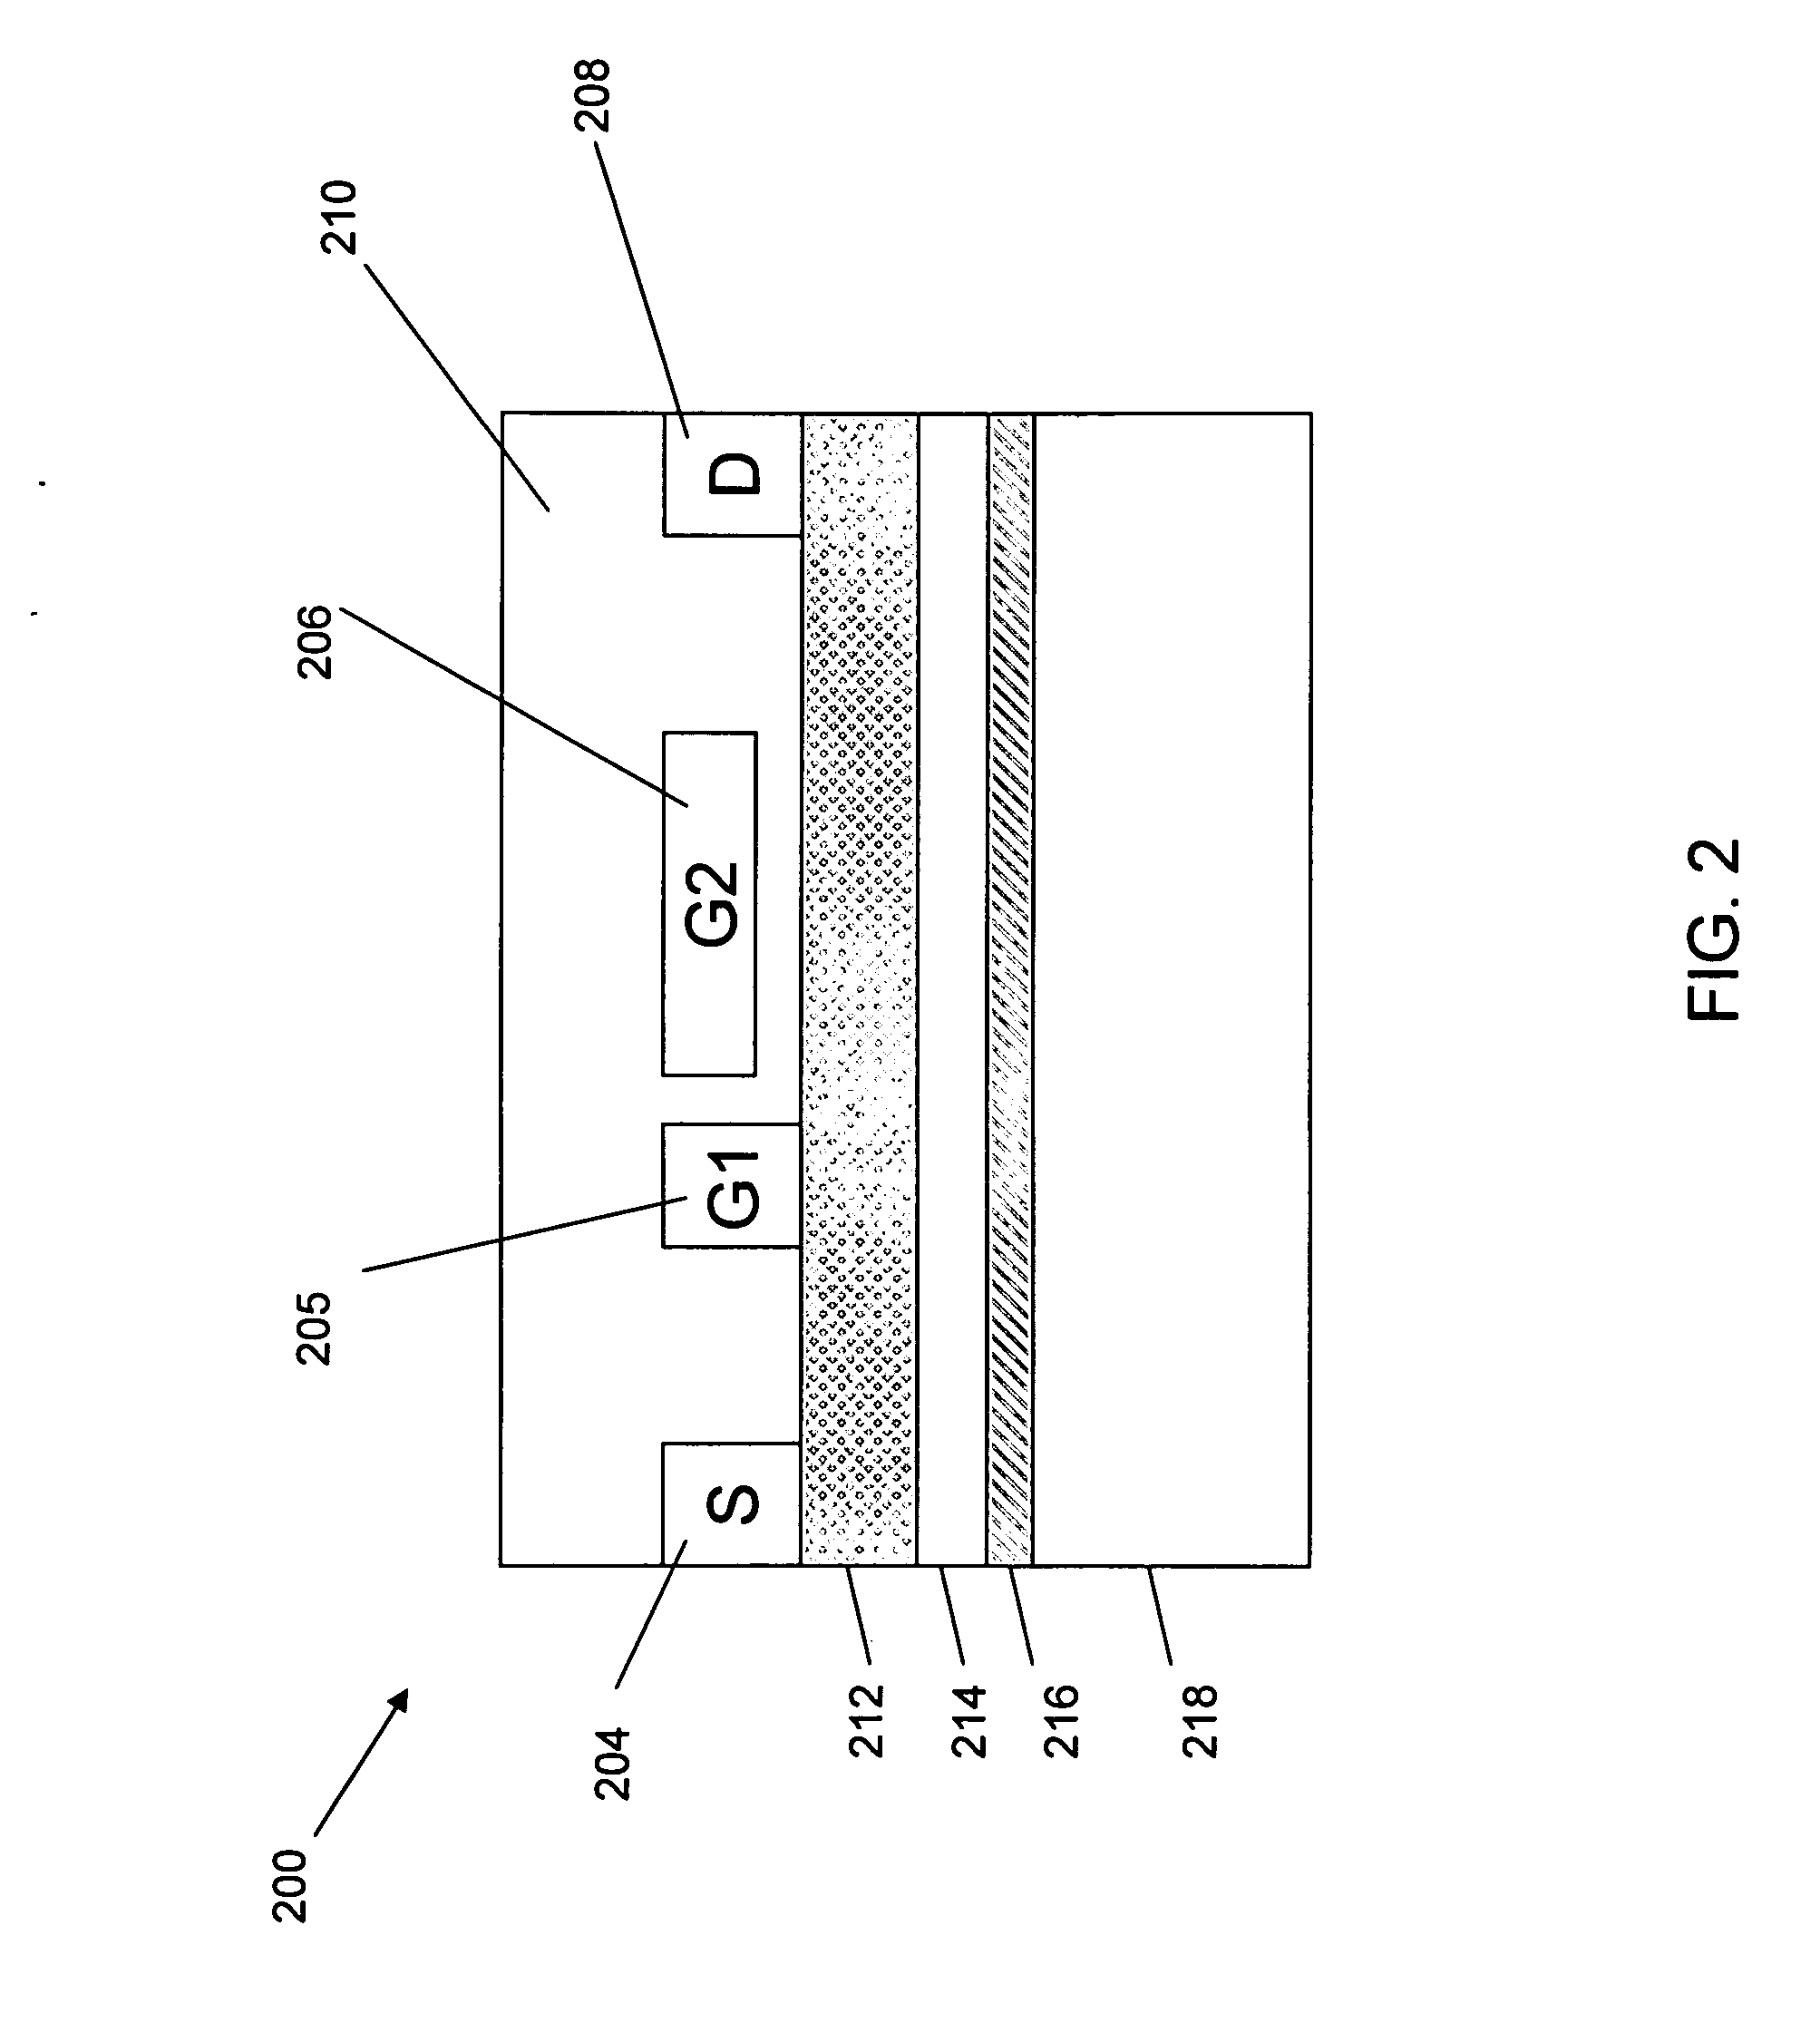 Field effect transistor with independently biased gates